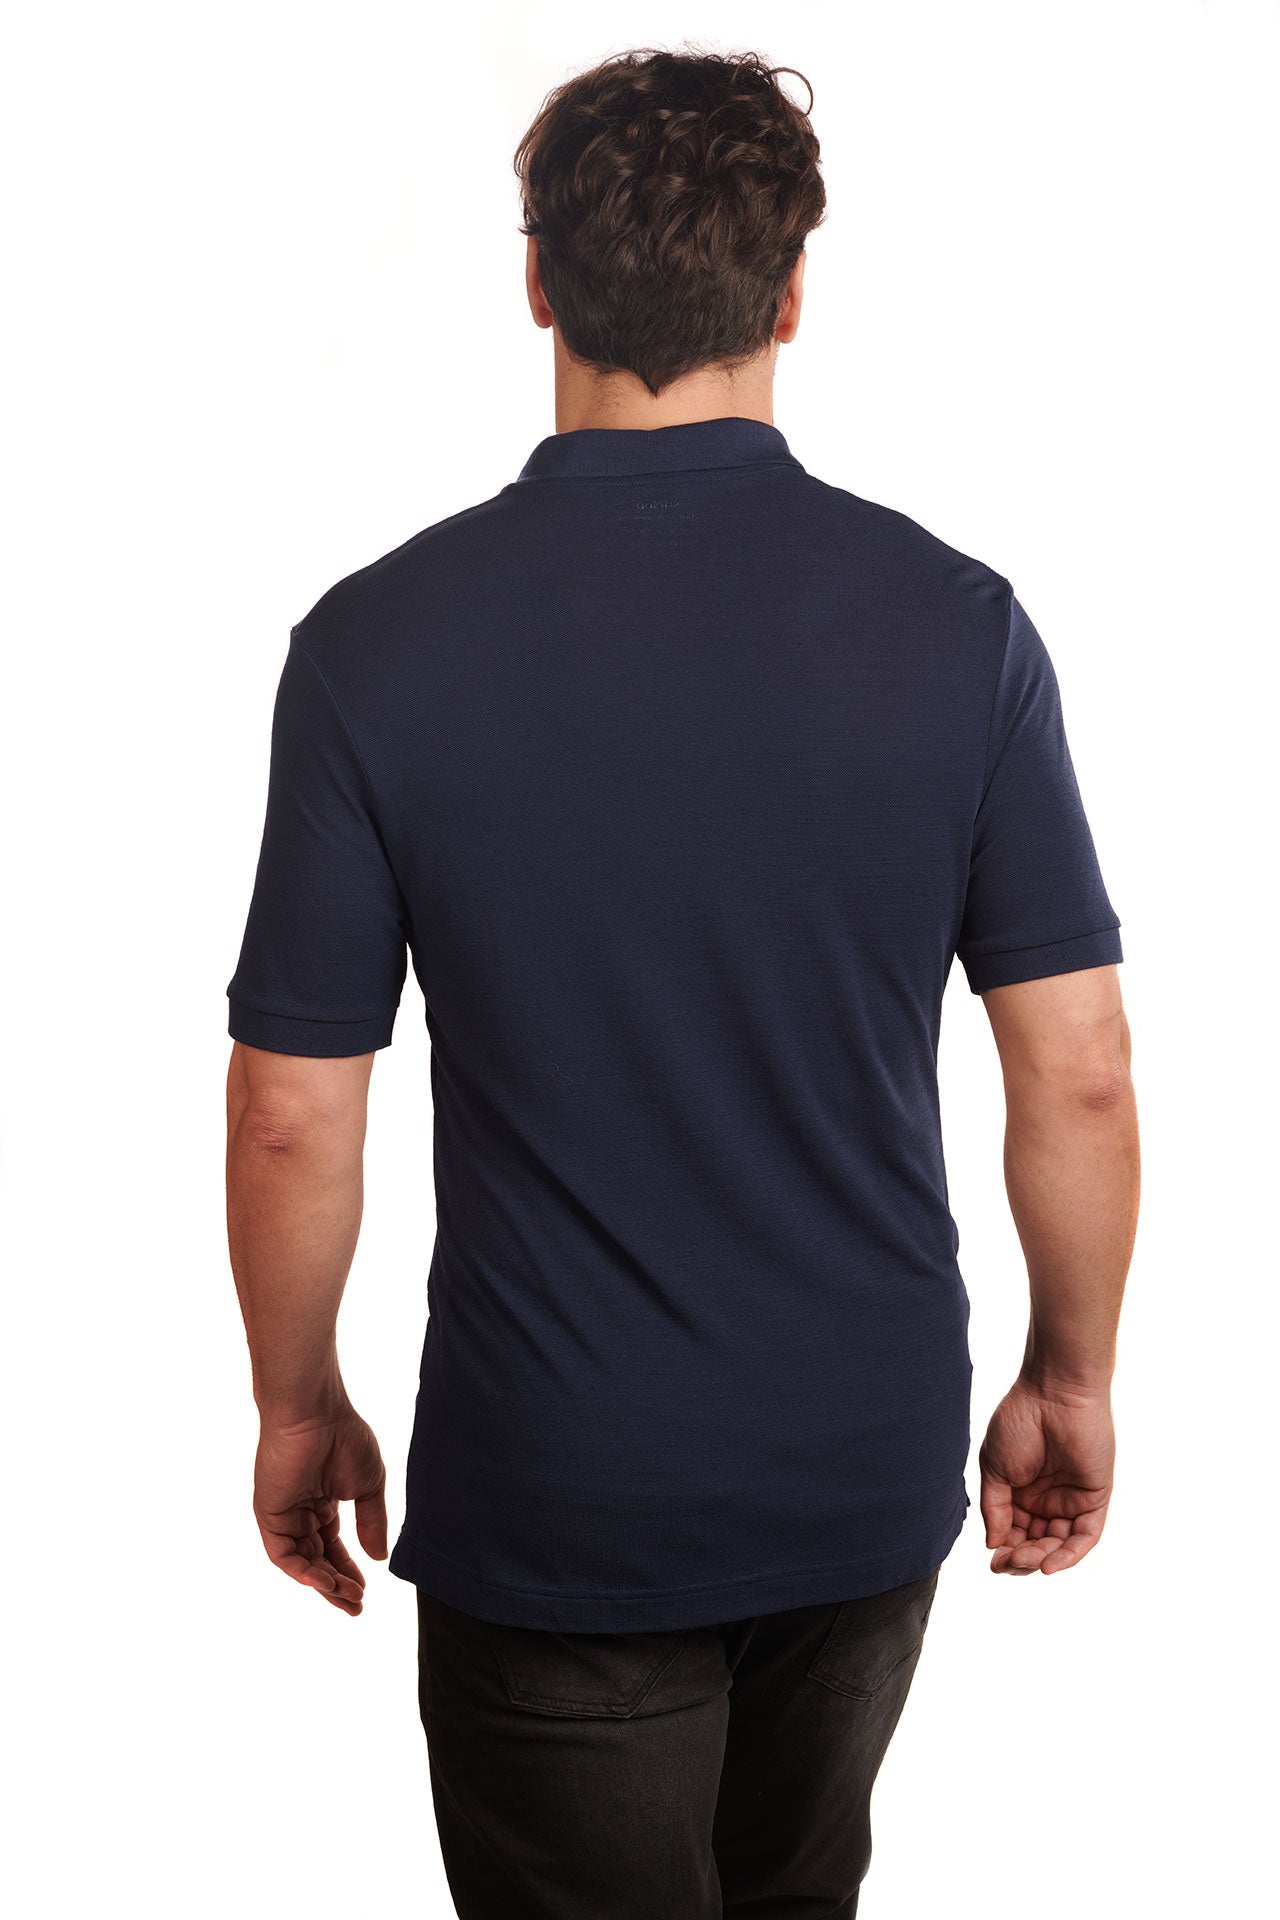 midnight-blue-biodegradable-pure-merino-wool-golf-polo-shirt-for men-by-snöleo.-back-of-model-view.